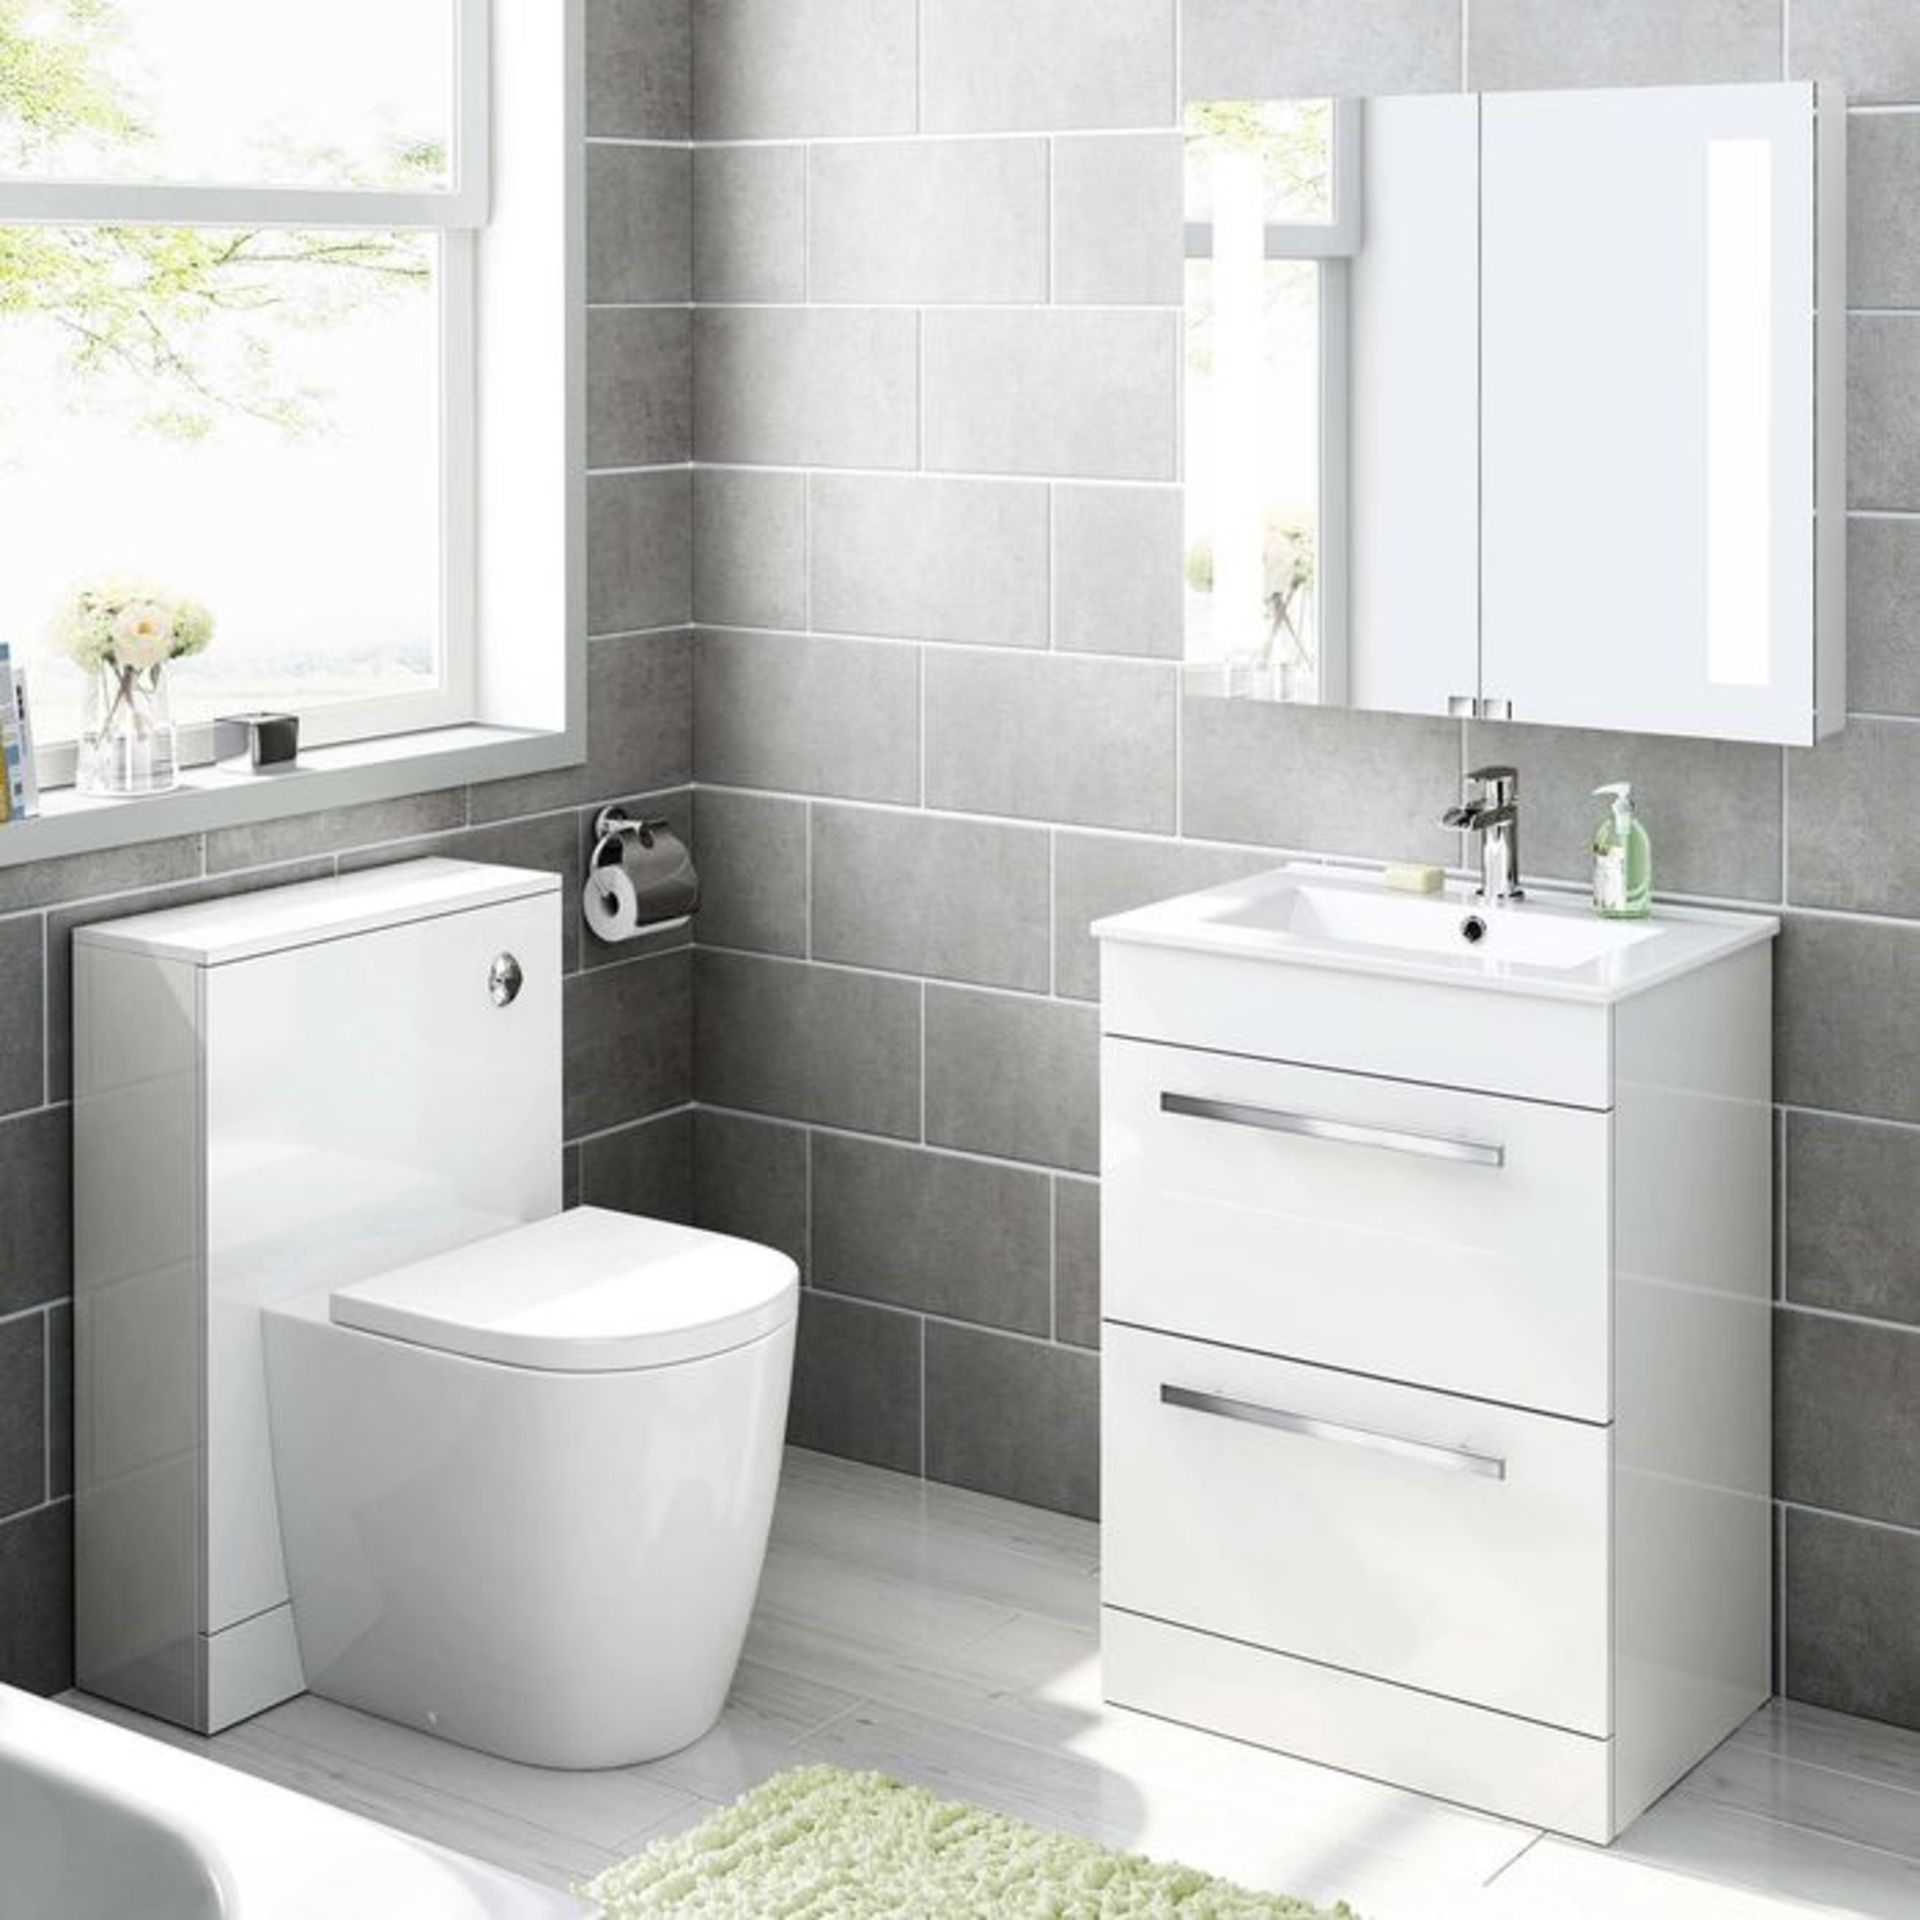 (DK305) 600mm Avon High Gloss White Double Drawer Basin Cabinet - Floor Standing. RRP £499.99. Comes - Image 3 of 5